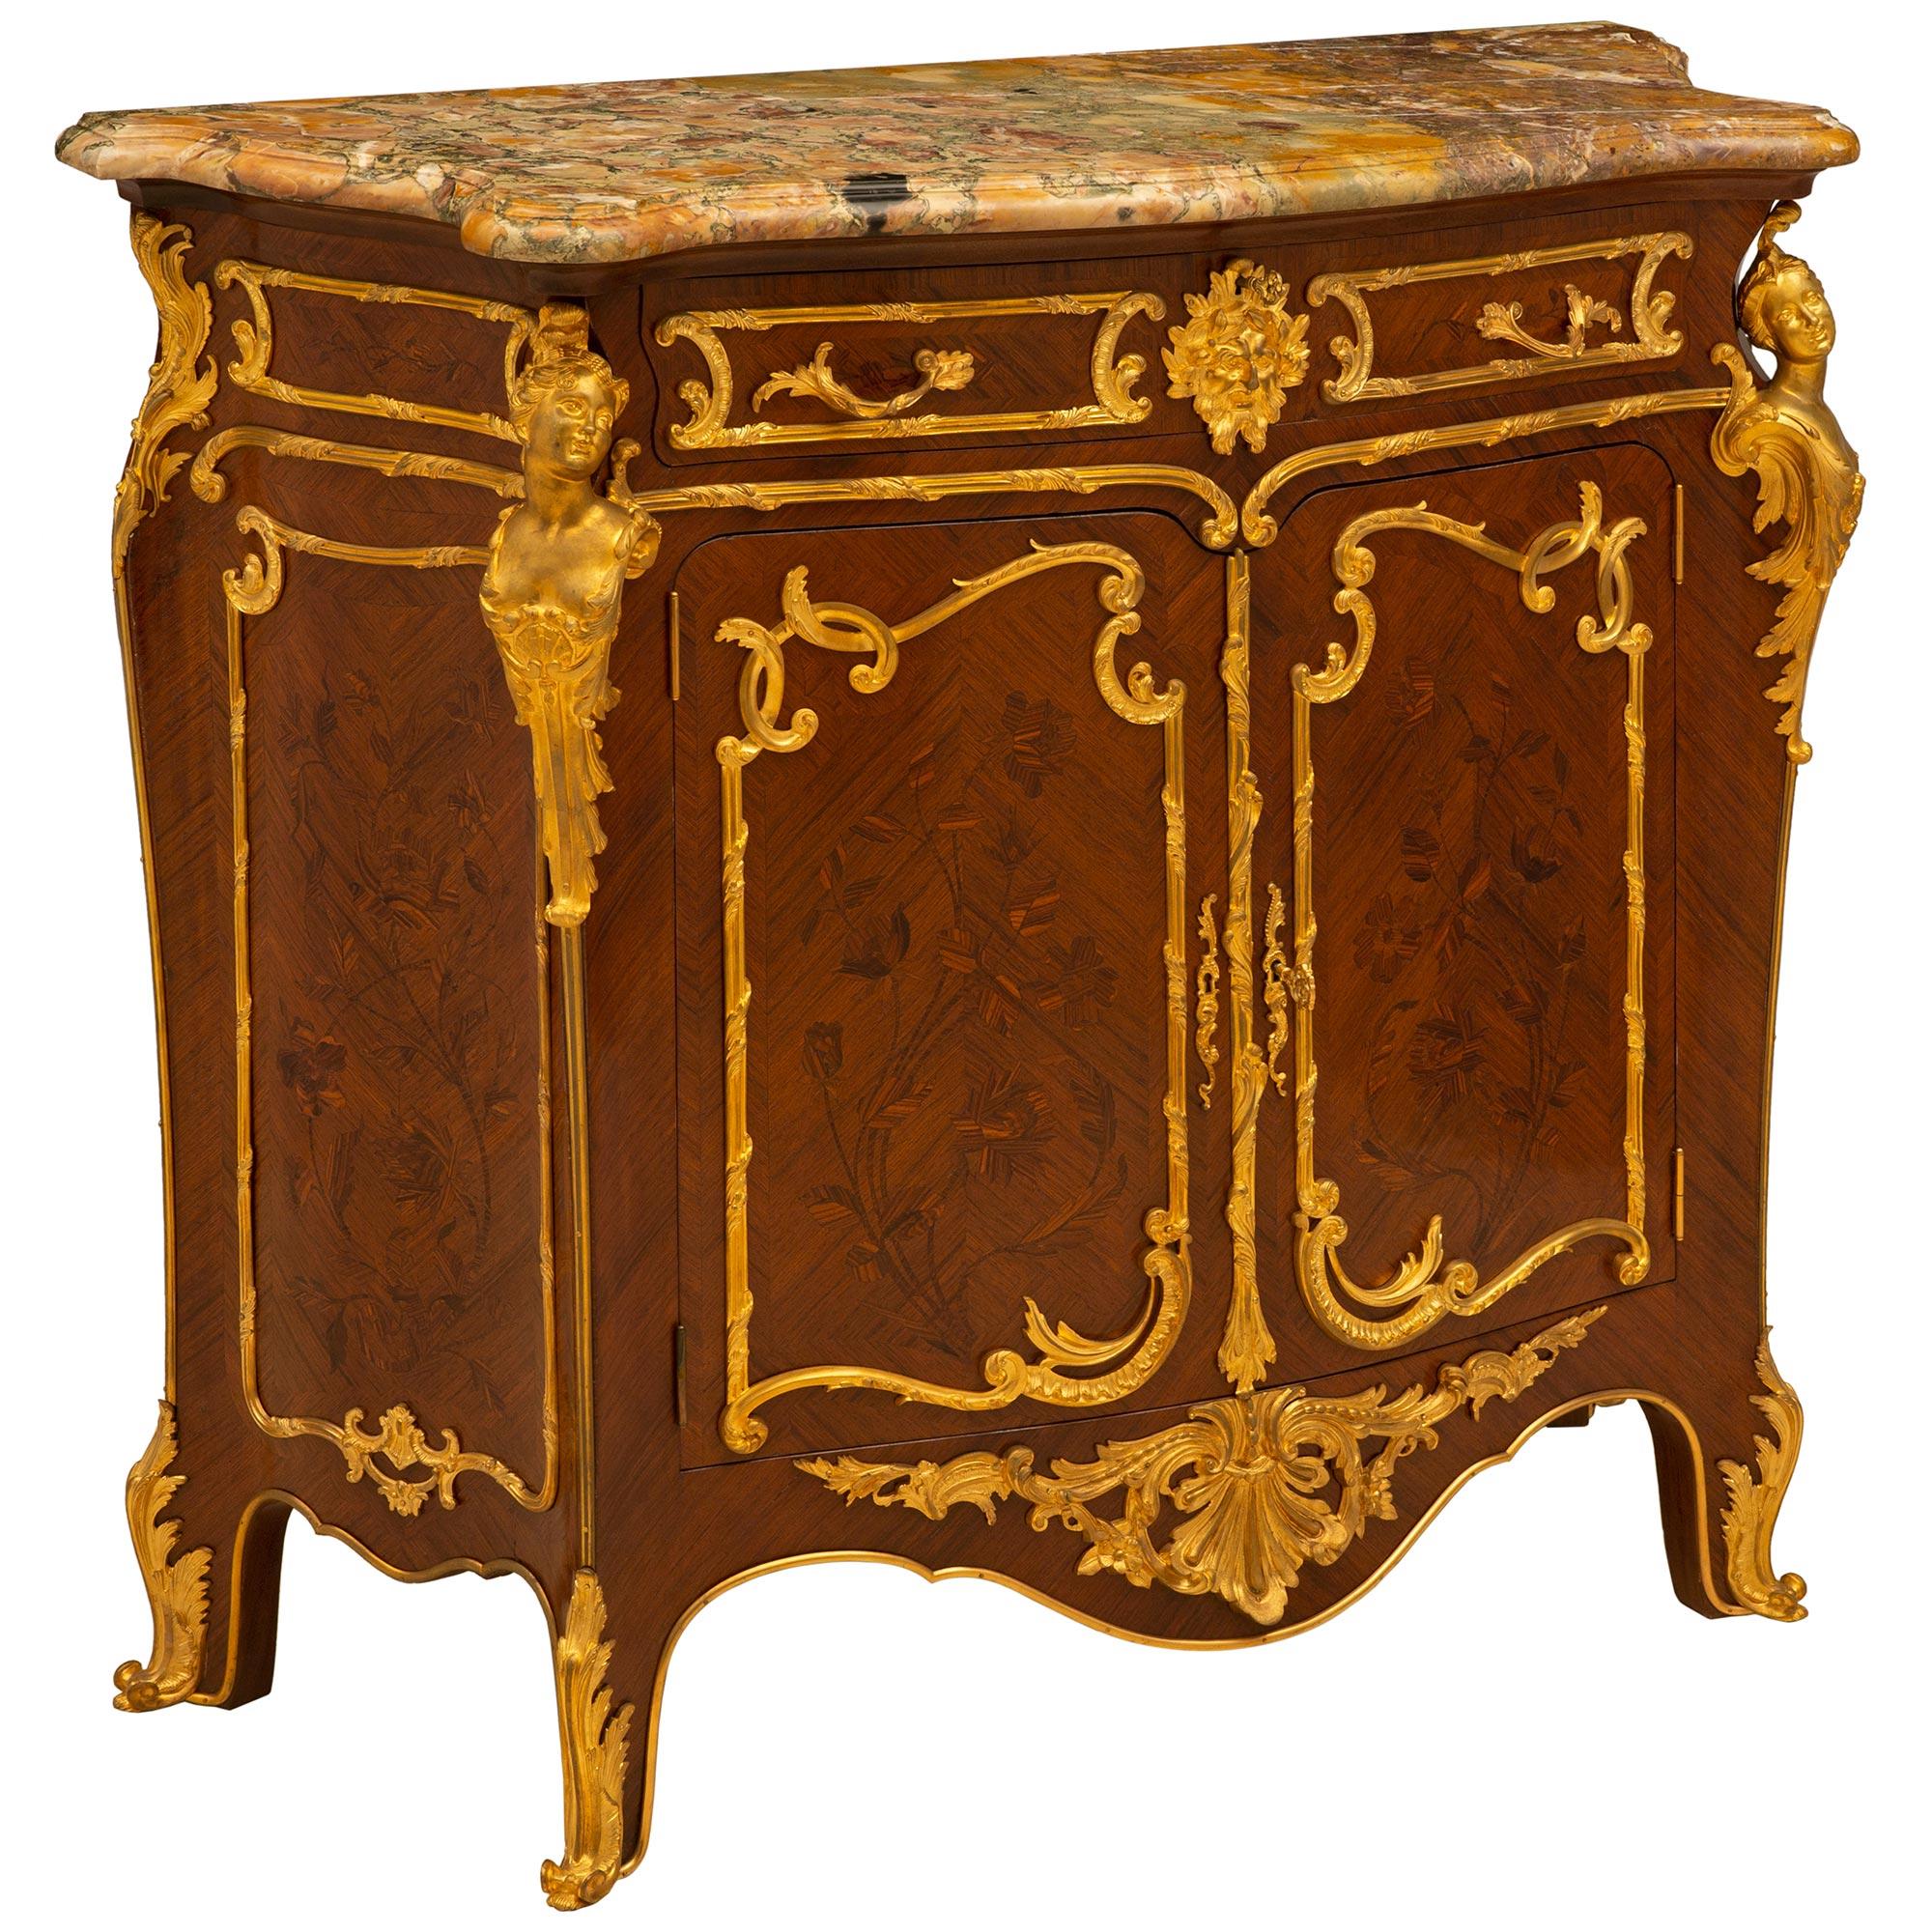 French 19th Century Louis XV Style Tulipwood Kingwood and Ormolu Cabinet In Good Condition For Sale In West Palm Beach, FL